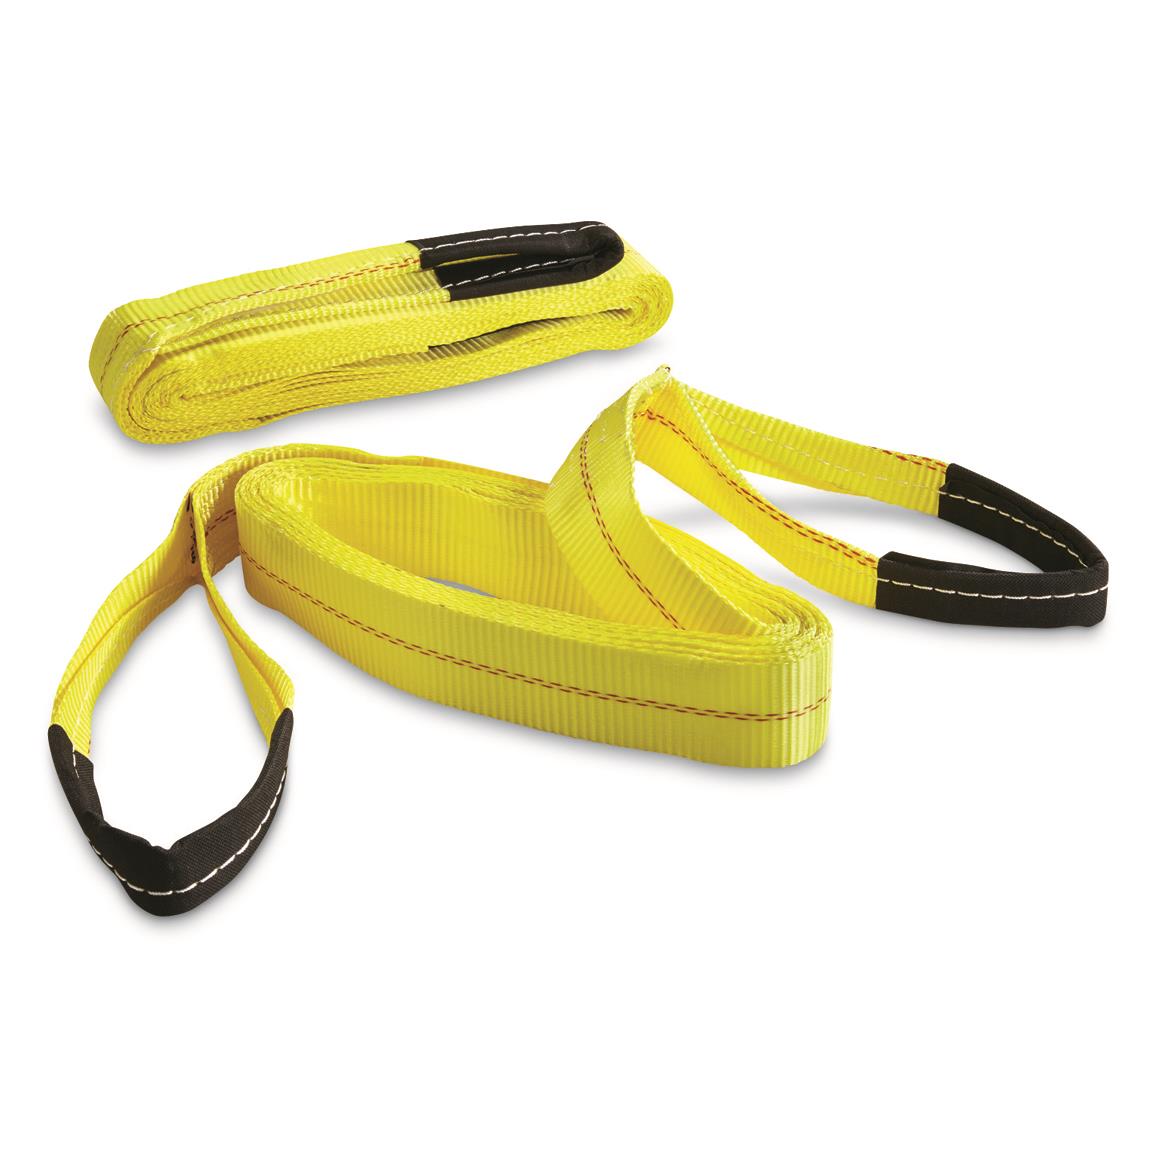 Python 2" x 20' Tow Straps, 2 Pack